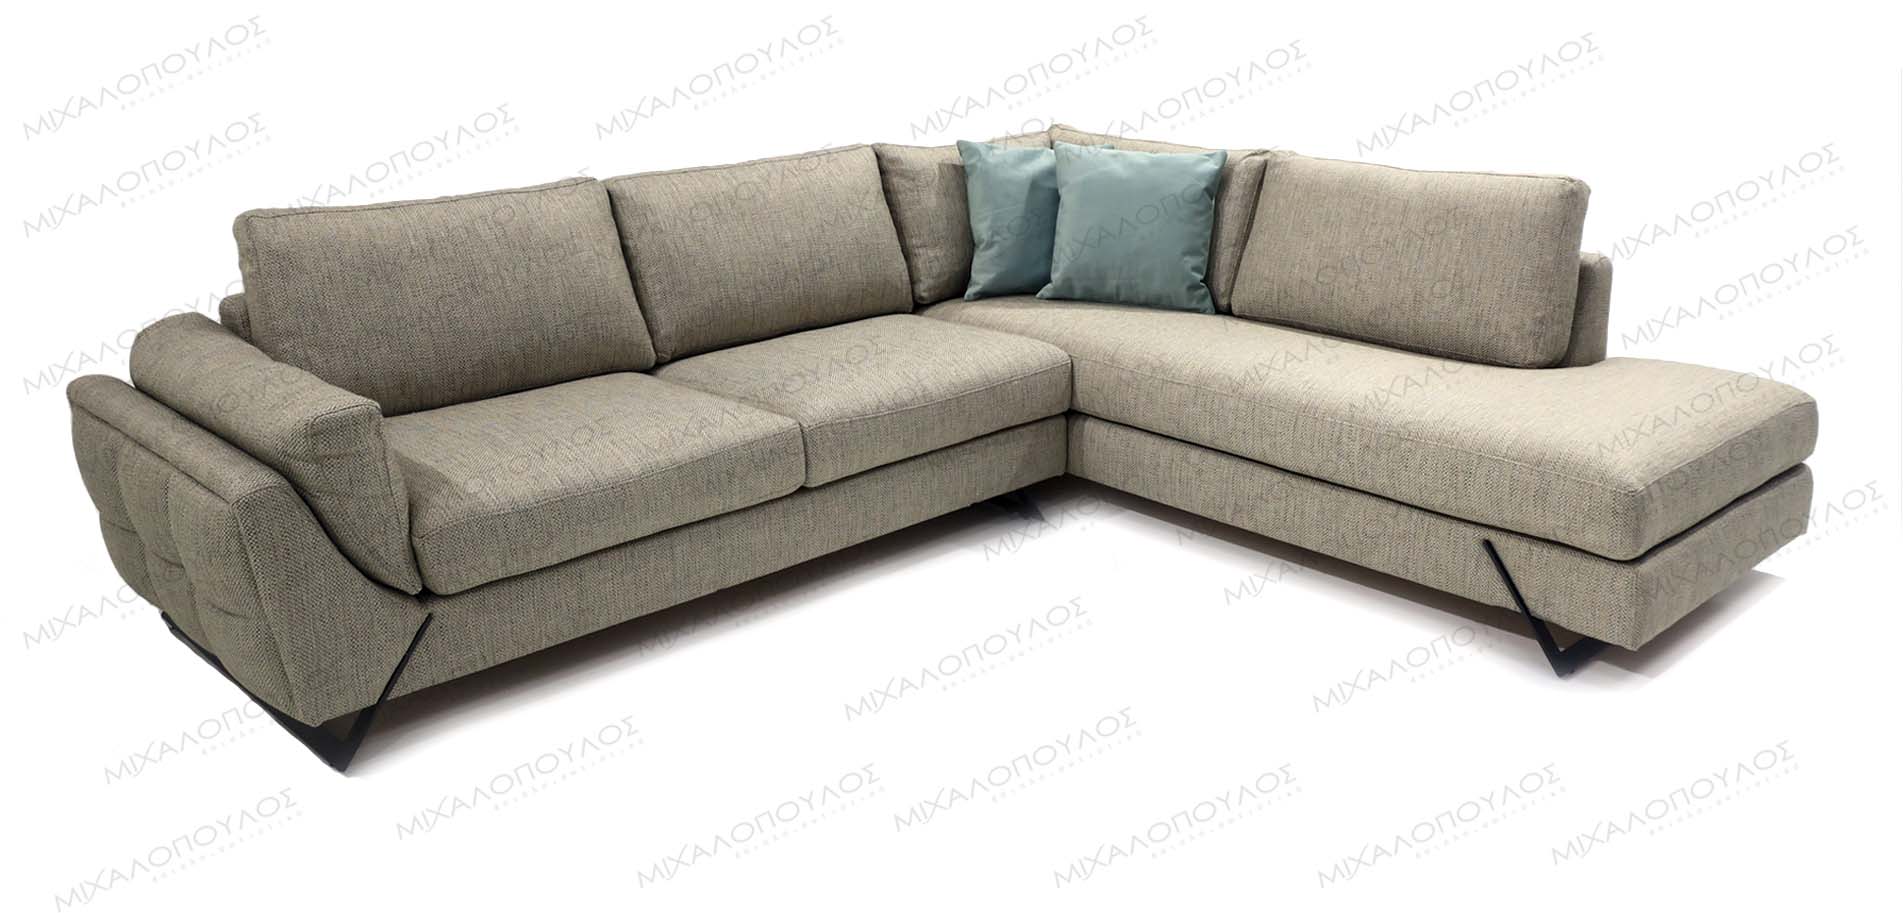 Sofa with metal legs